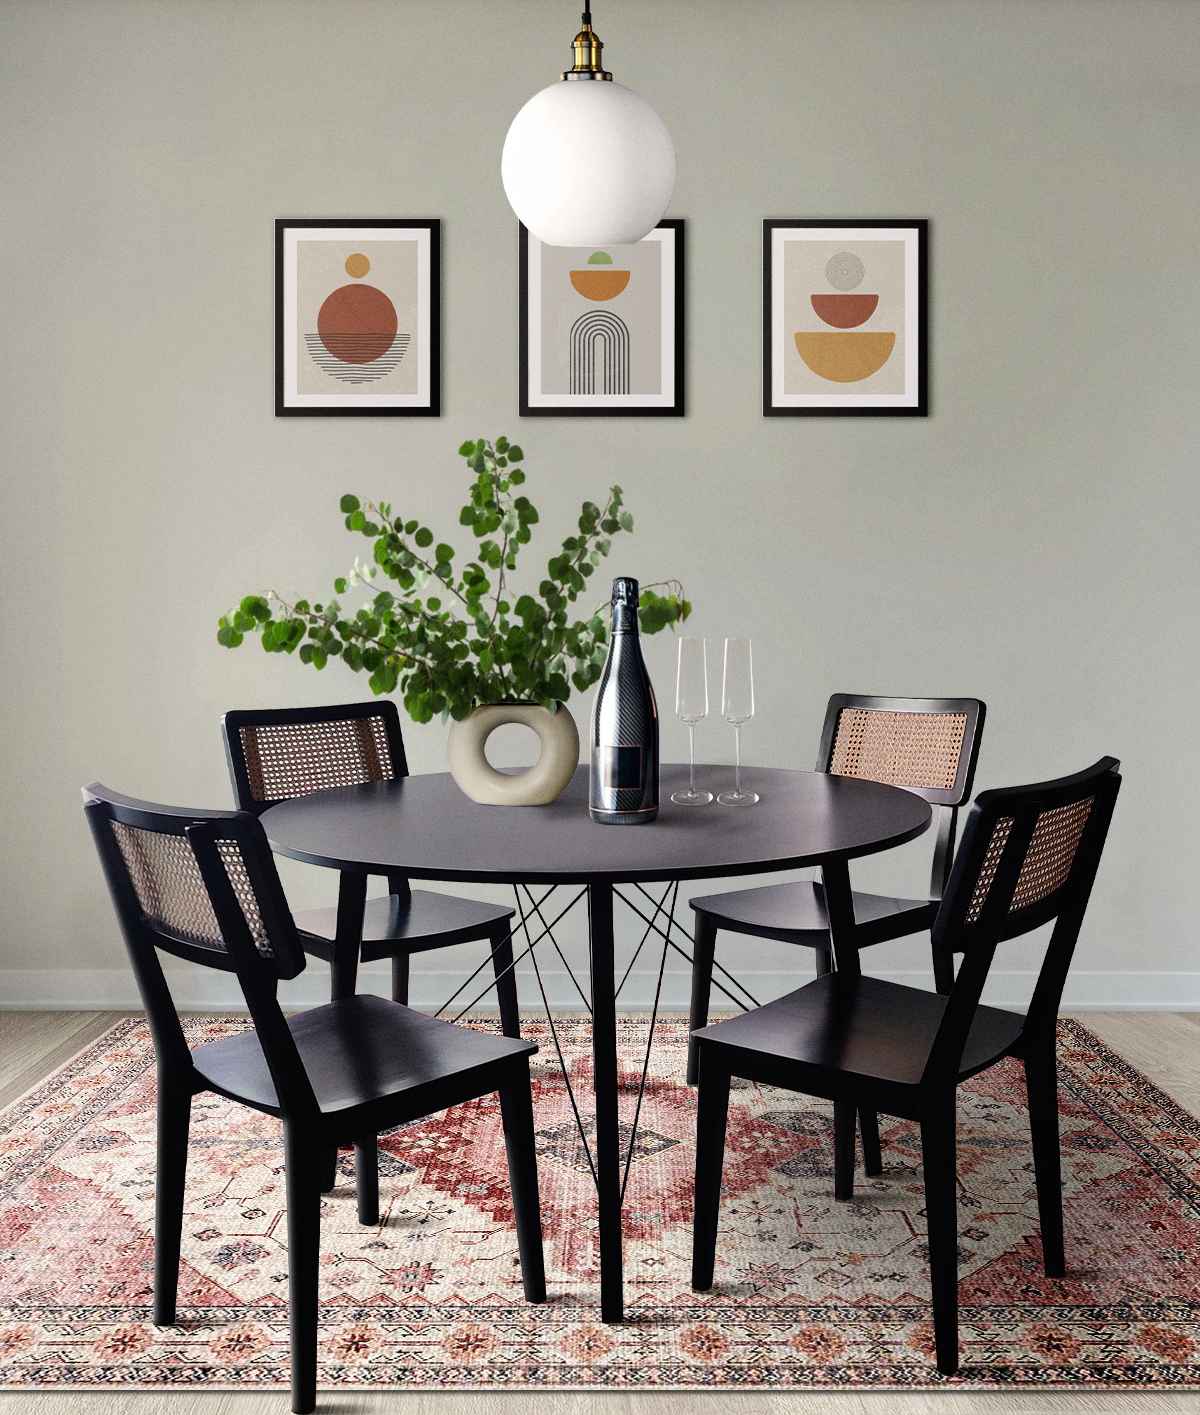 Ratargul Dining Chair